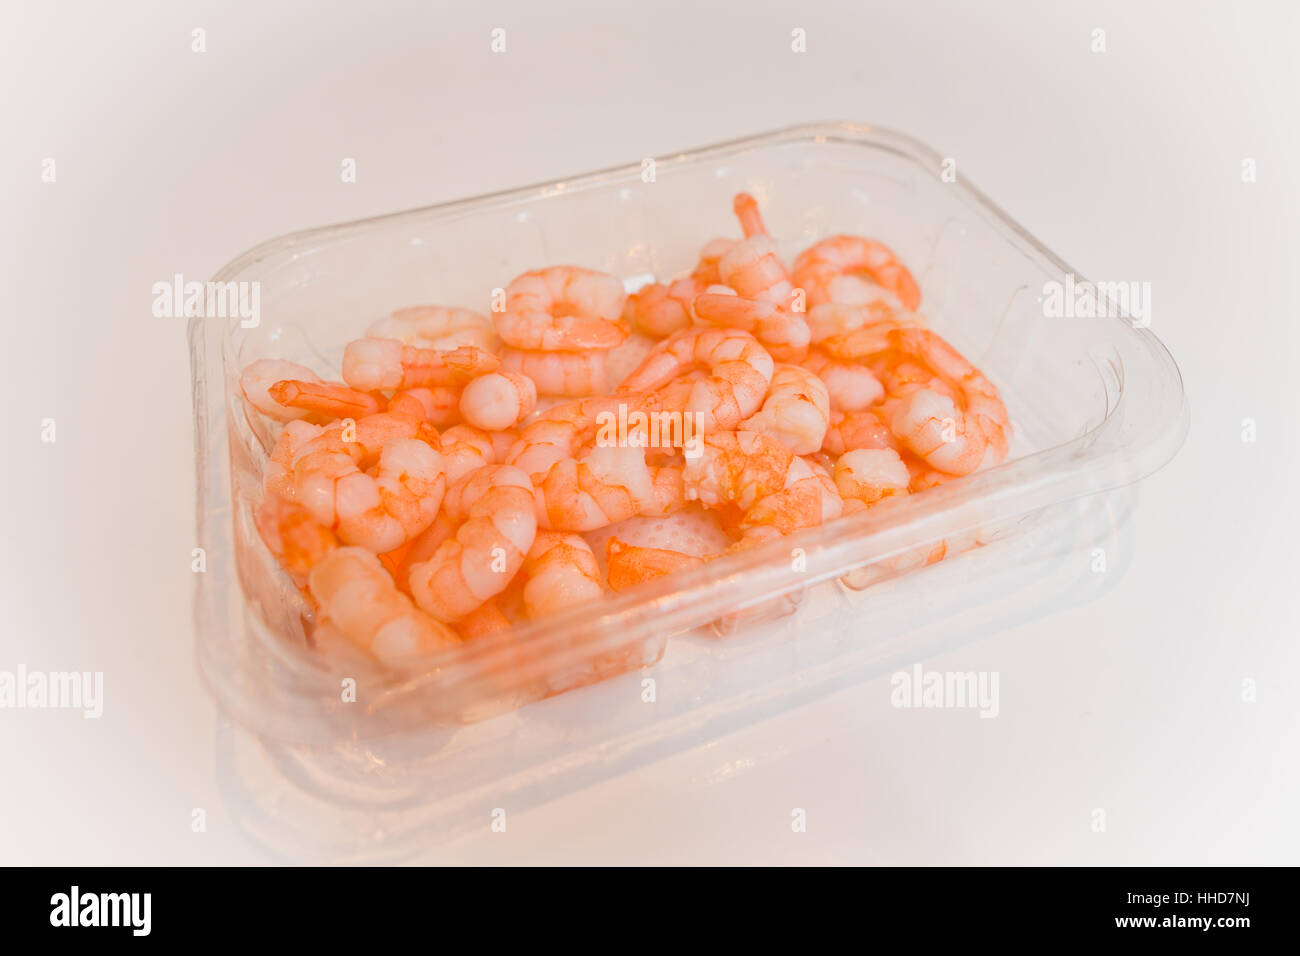 Large prawns in a bowls, cooked and ready to eat, sometimes called shrimps Stock Photo